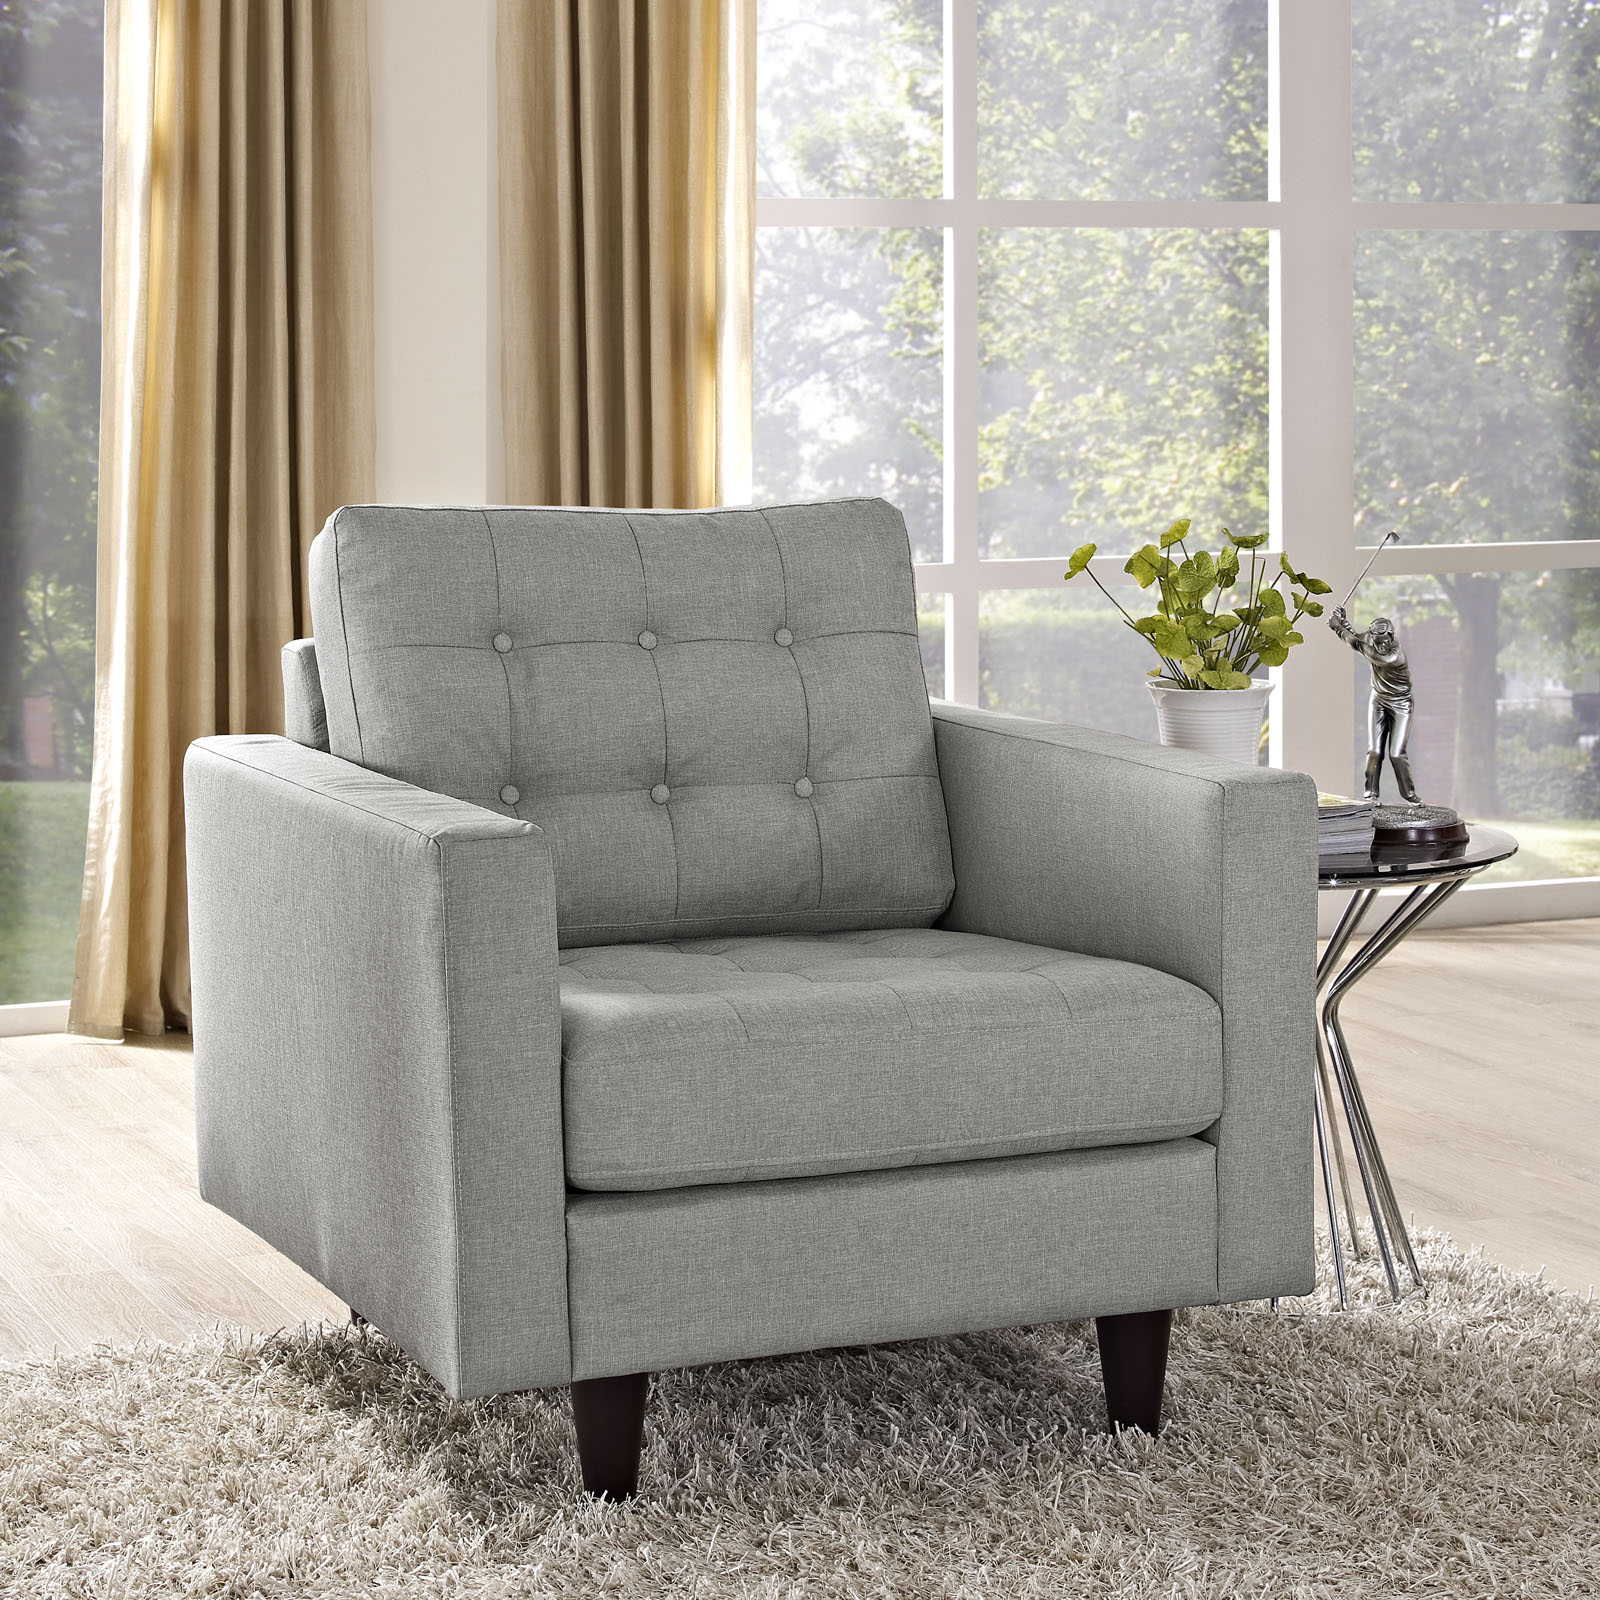 Modway Empress Upholstered Fabric Armchair in Light Gray - image 1 of 5